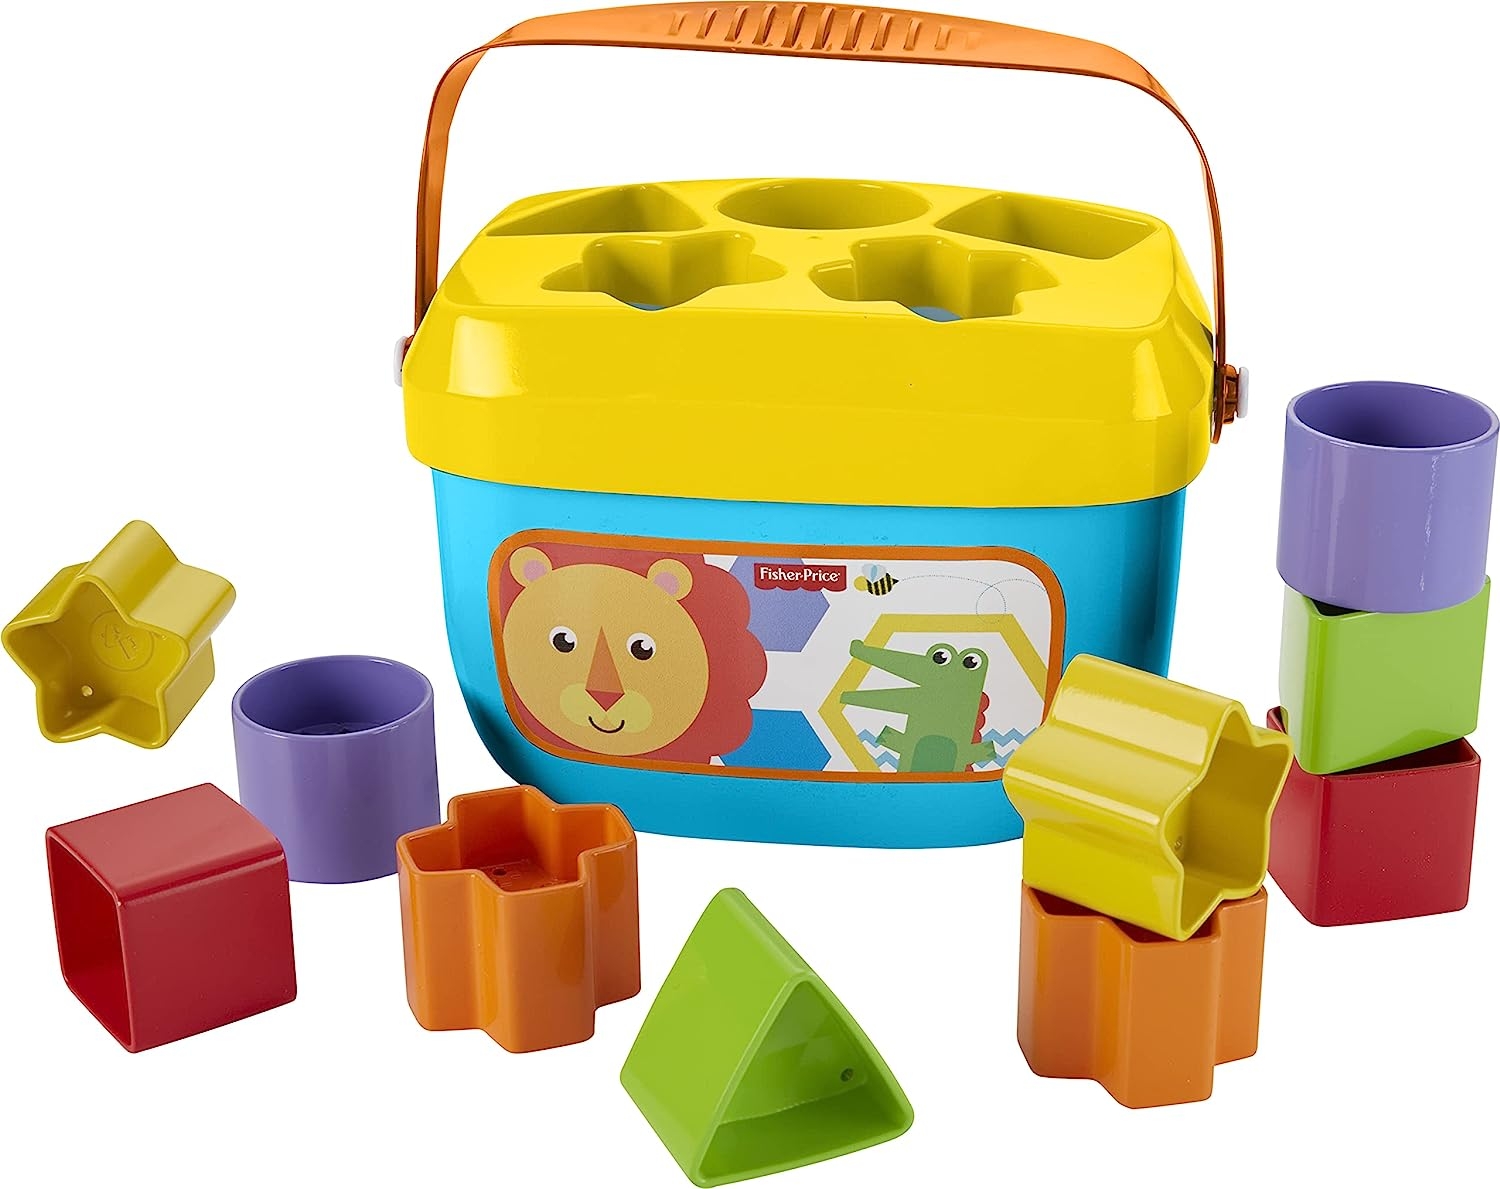 Fisher-Price Stacking Toy Baby’s First Blocks Set of 10 Shapes for Sorting Play for Infants Ages 6+ Months   Import  Single